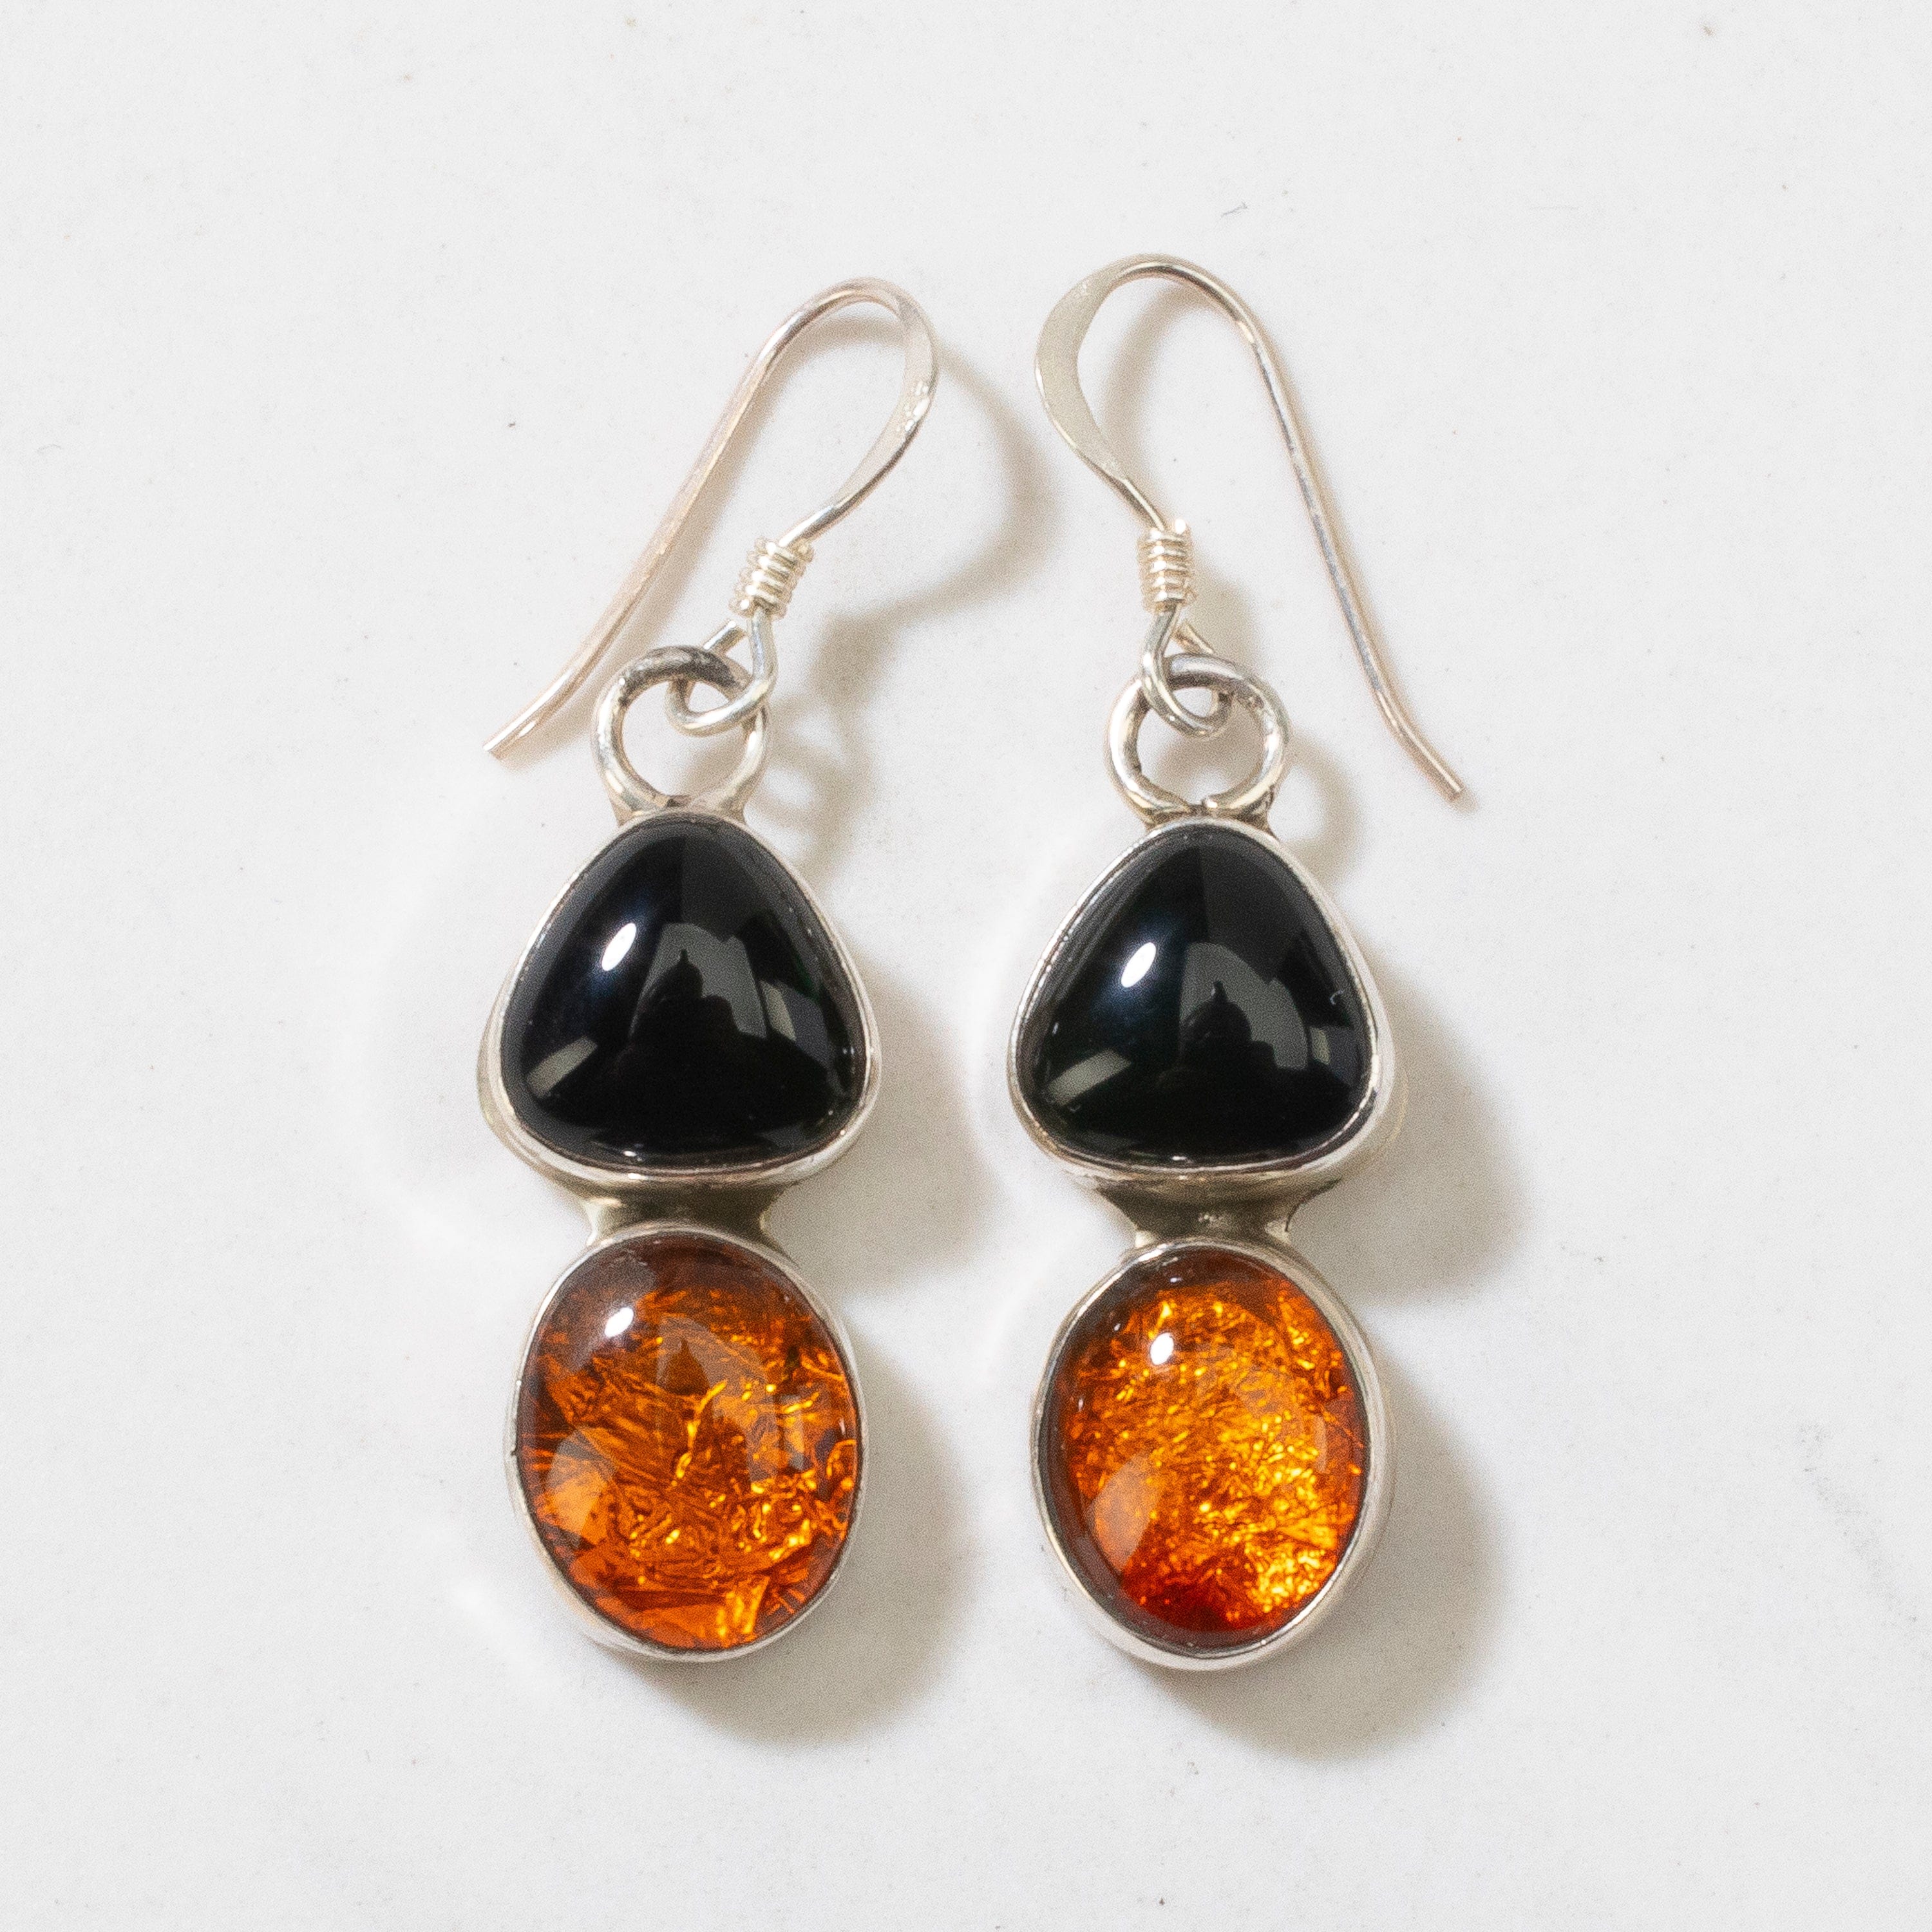 Kalifano Native American Jewelry Baltic Amber & Black Onyx Navajo USA Native American Made 925 Sterling Silver Earrings with French Hook NAE250.009